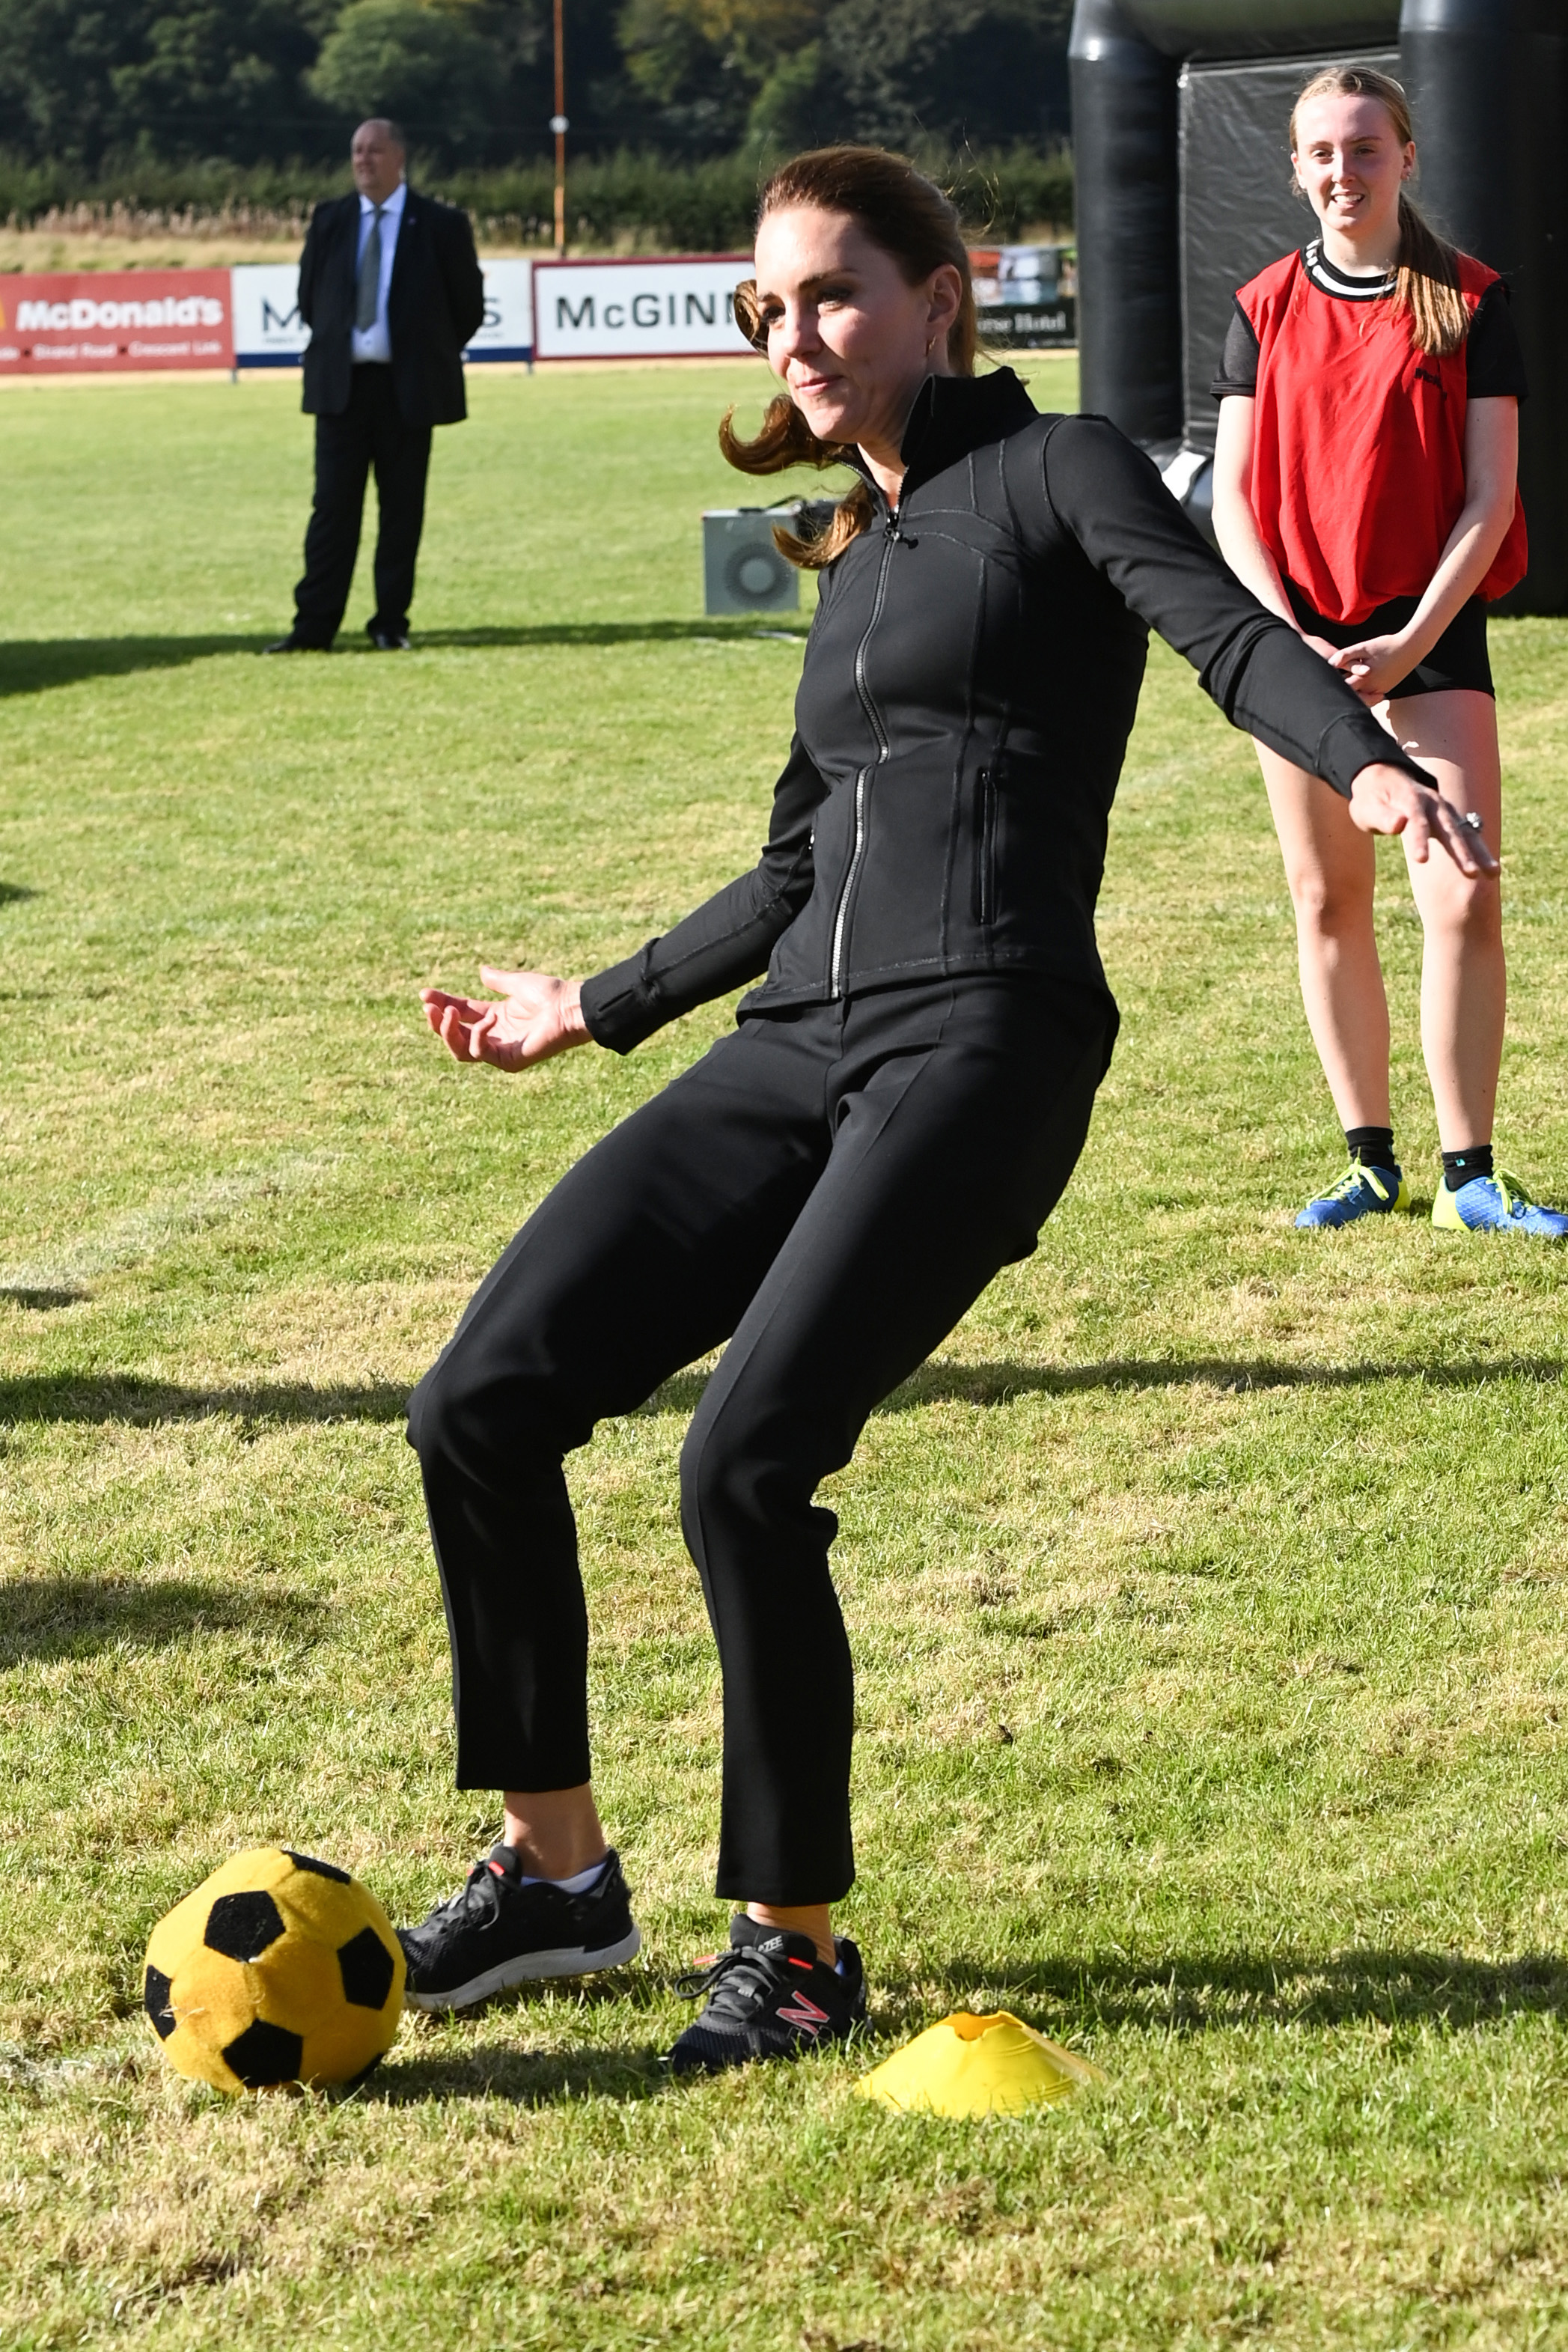 Kate kicks a ball  as she visits the City of Derry Rugby Club on September 29, 2021 in Londonderry, Northern Ireland. (Photo: Pool/Samir Hussein/WireImage)